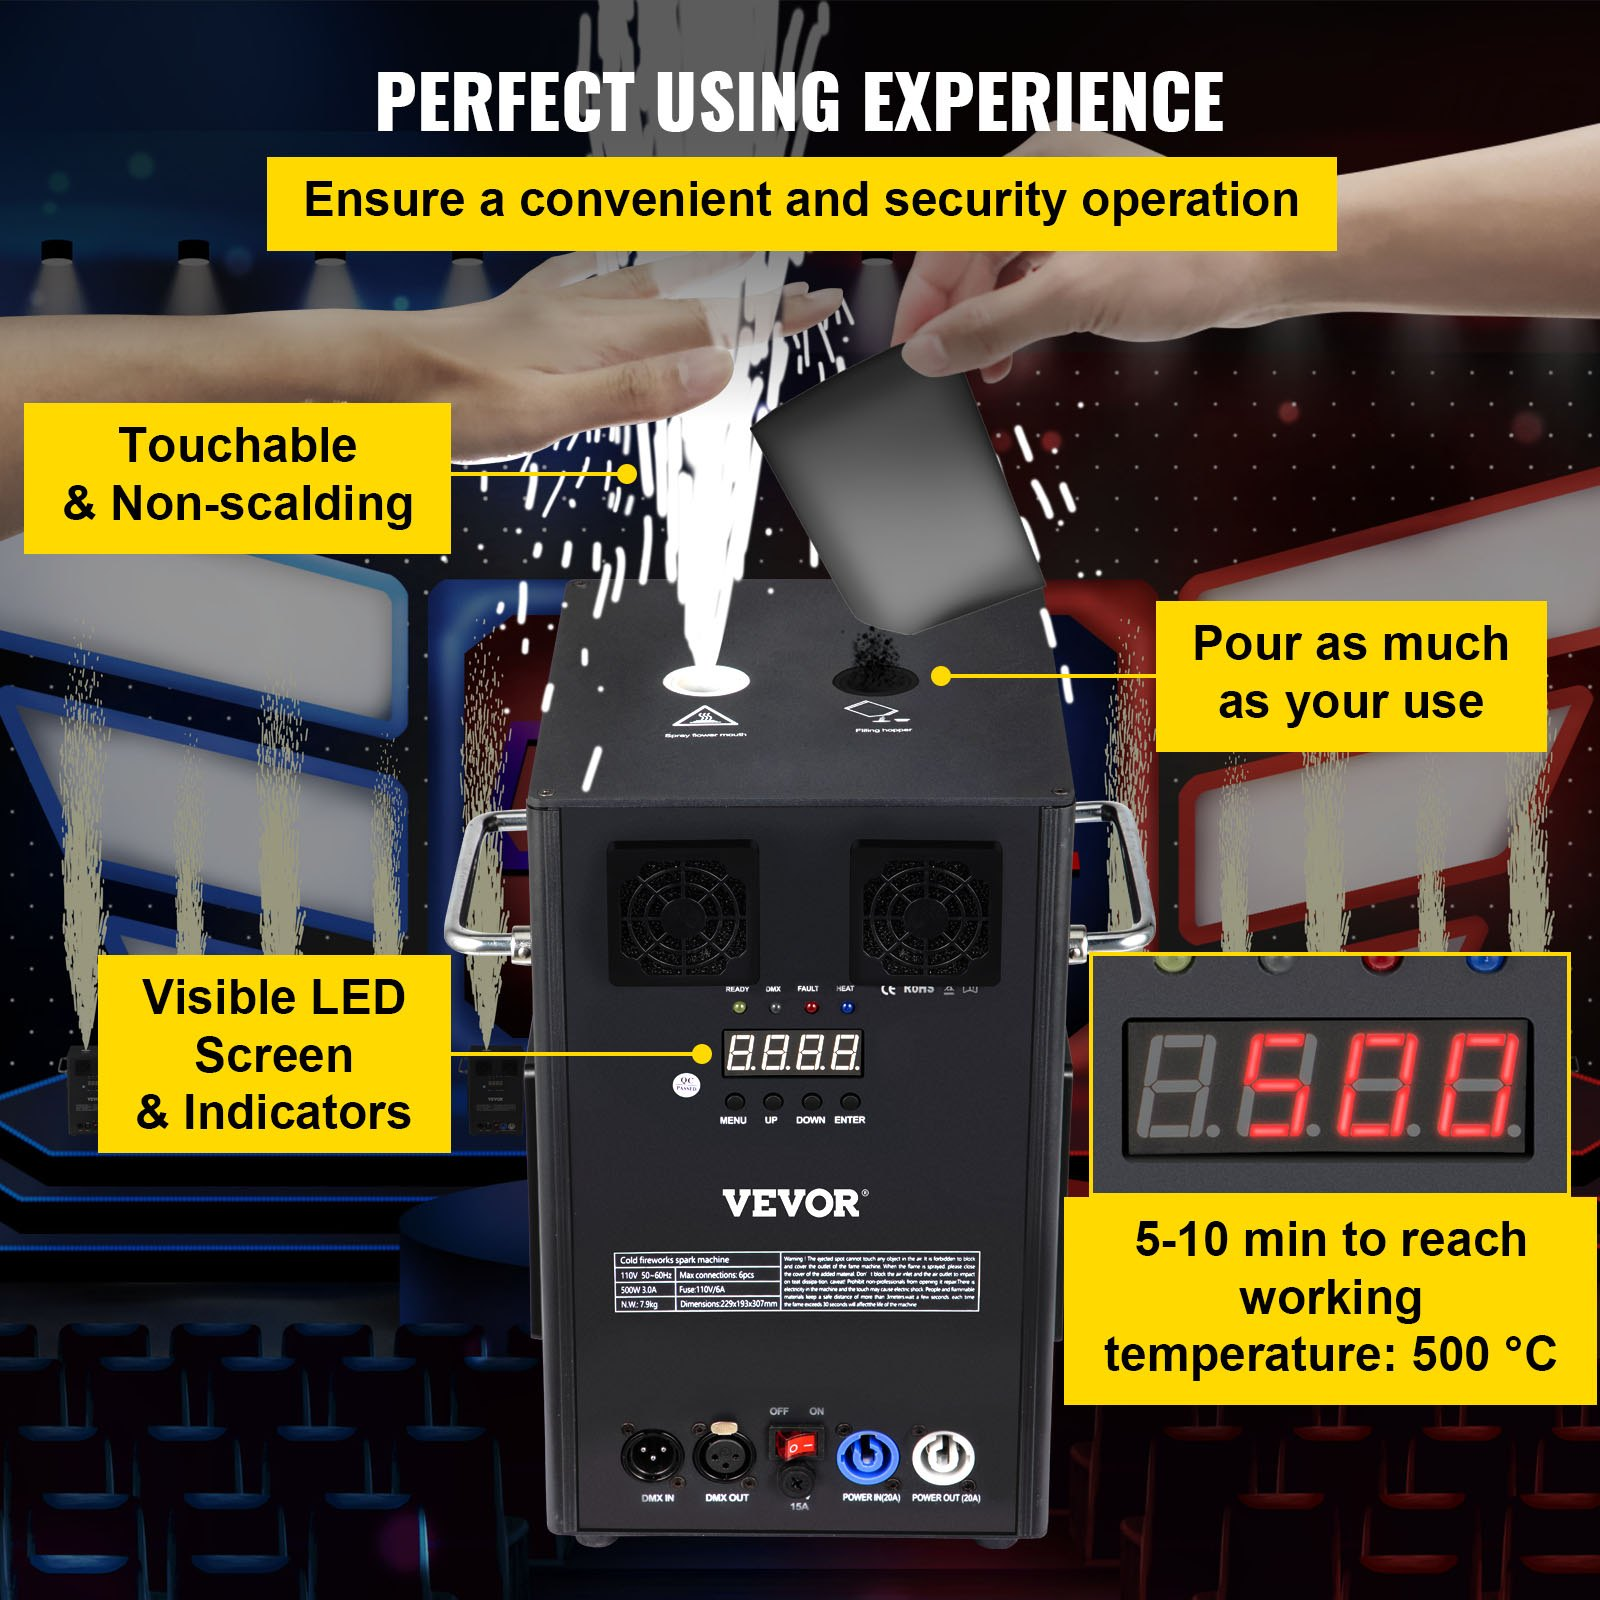 VEVOR Large Stage Equipment Special Effect Machine, 700W 4pcs Stage Lighting Effect Machine with Wireless Remote Control, Smart DMX Control Stage Equipment Showing Machine for Wedding, Musical Show, Goodies N Stuff